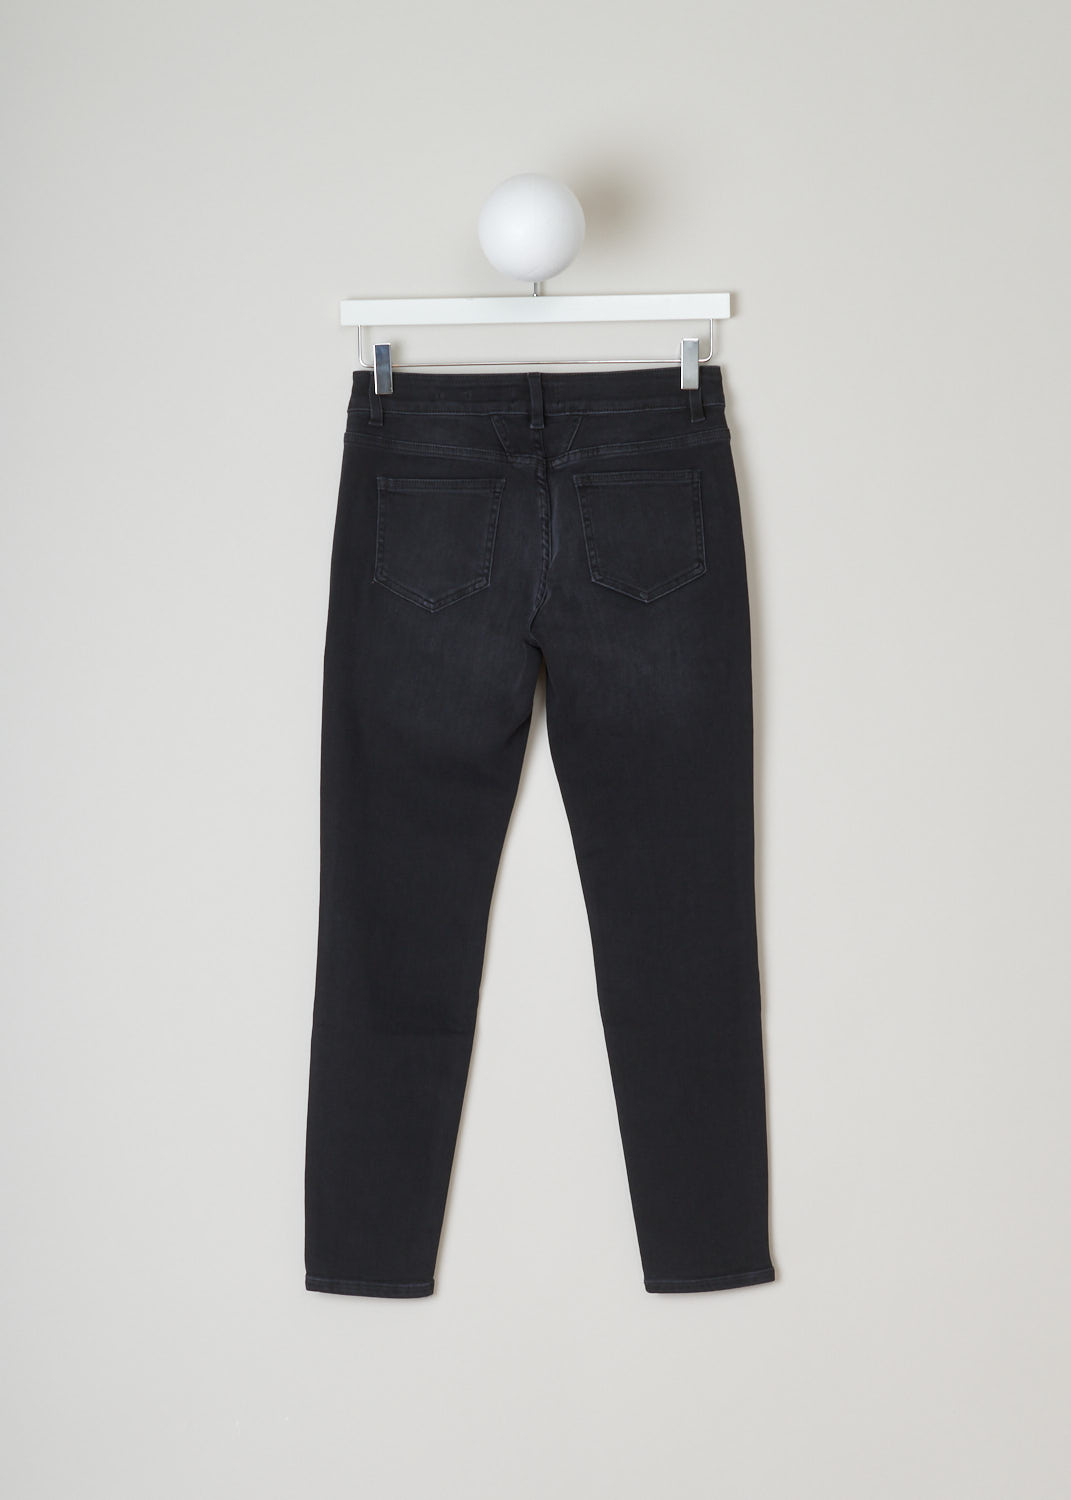 Closed, Slim-fit mid-waist black jeans, baker_C91833_0E3BL_bl, black, back, Mid-waist slim-fit jeans made with cropped leg length. Comes with the traditional 5 pockets. As closure options this model had one button and concealed zipper.